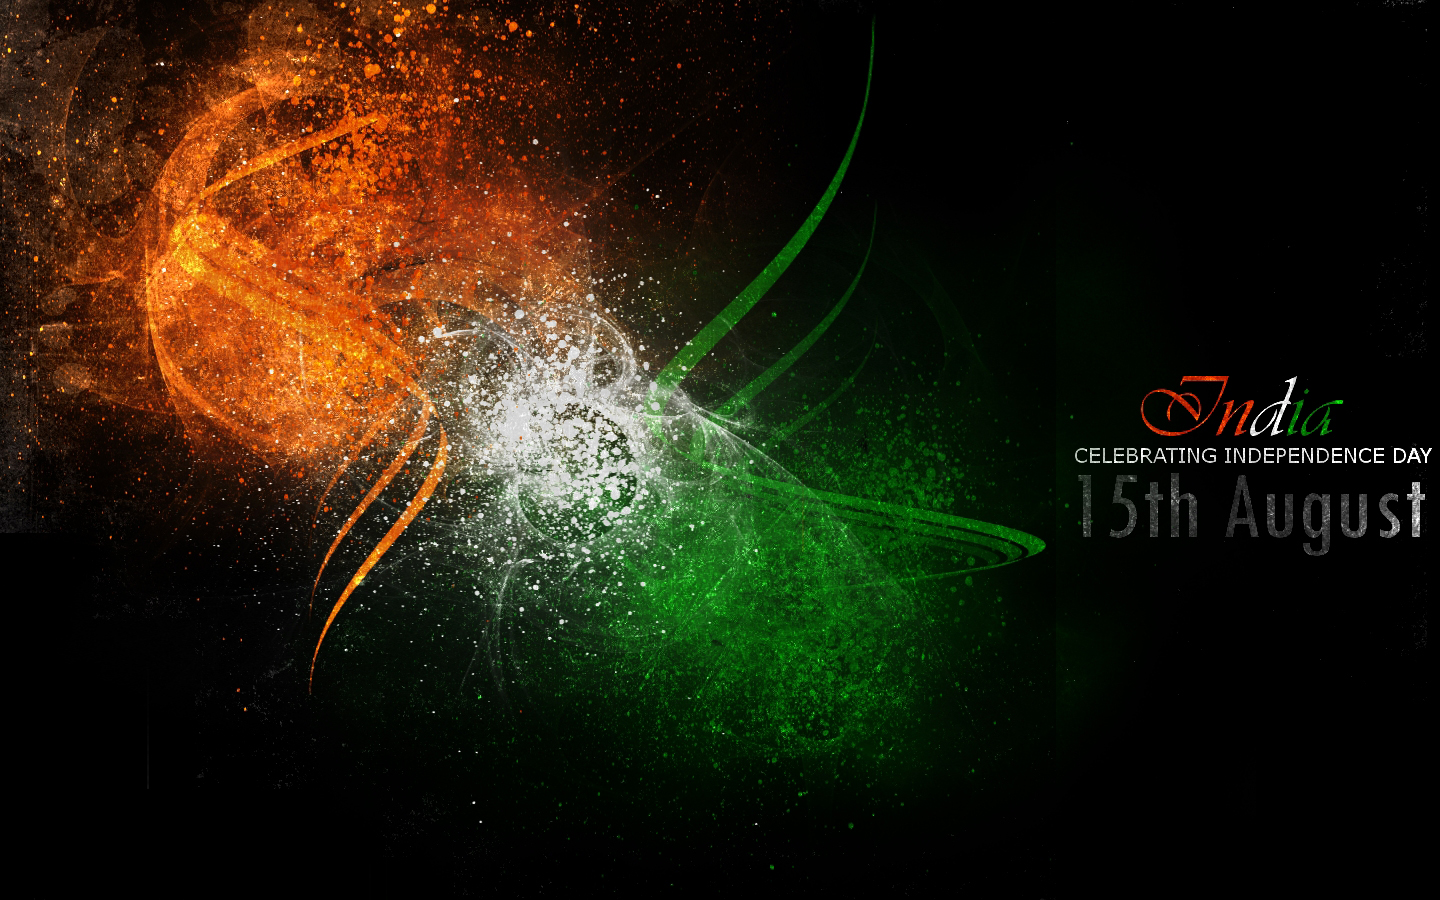 day of IndiaIndia historyfull hd wallpapers of independence dayflag